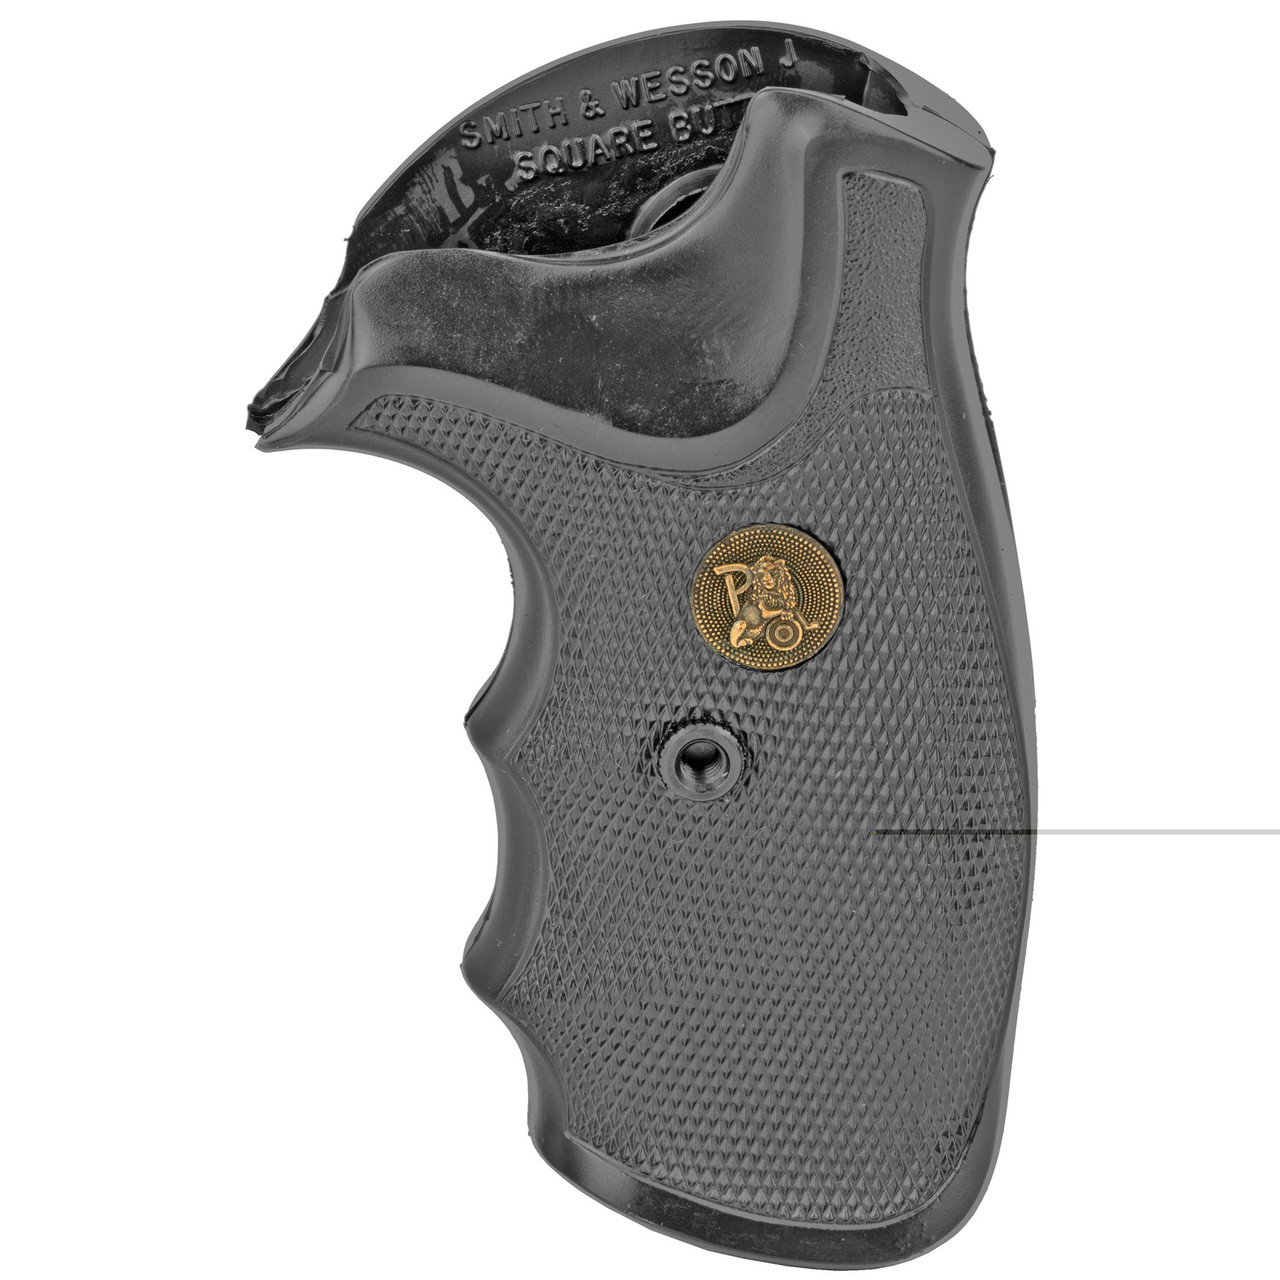 Pachmayr 3250 Gripper S&w J Frm Square Butt